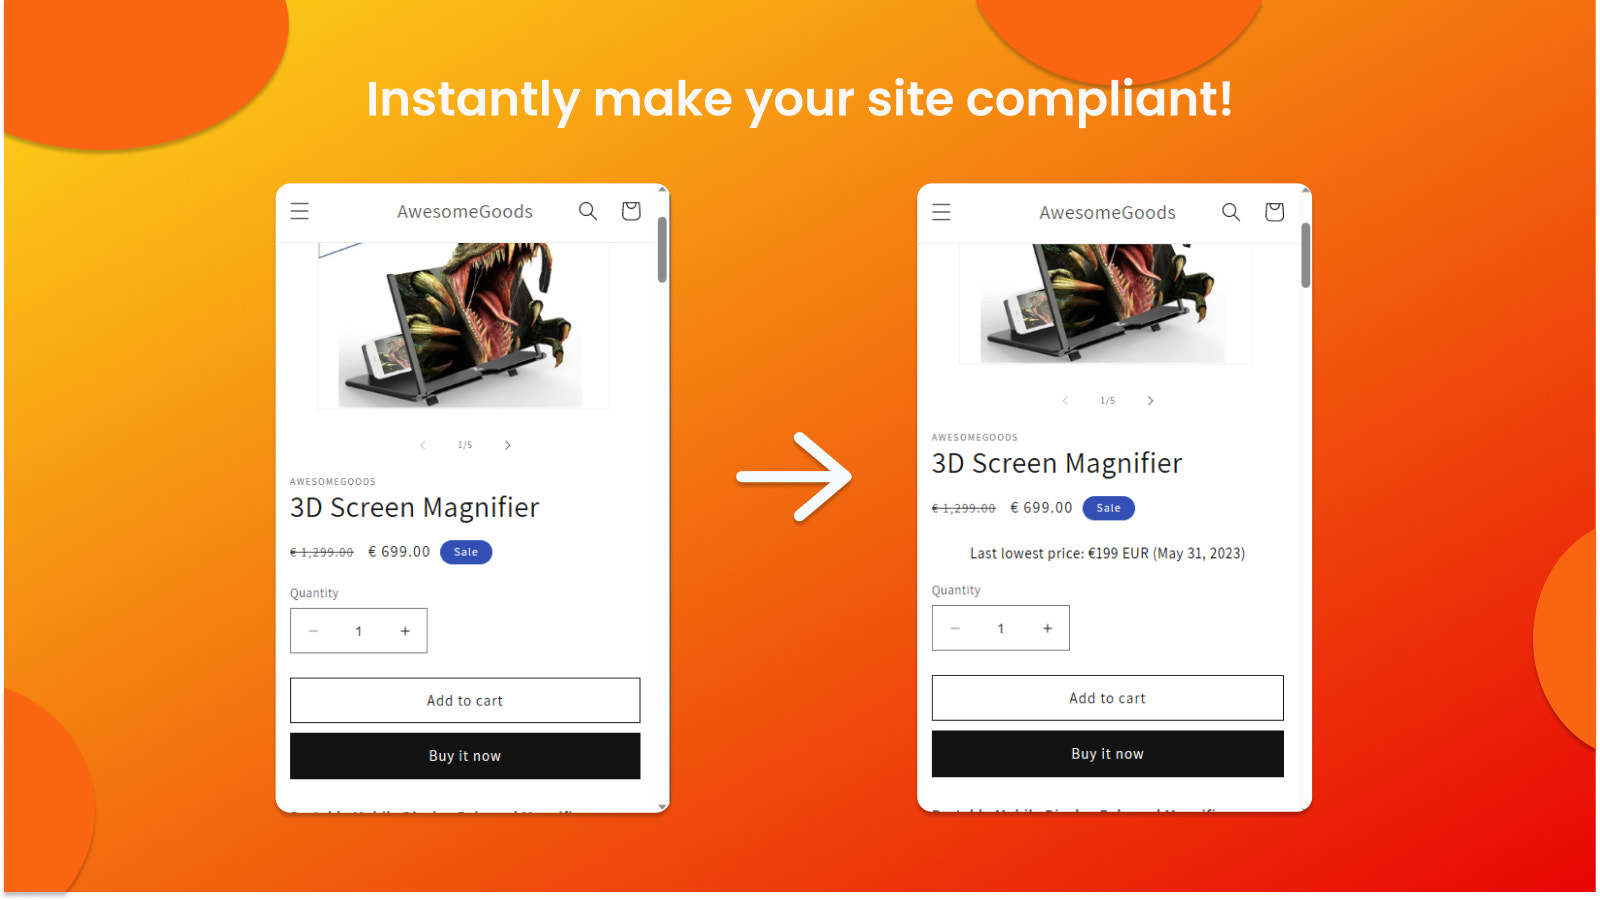 Instantly make your site compliant!